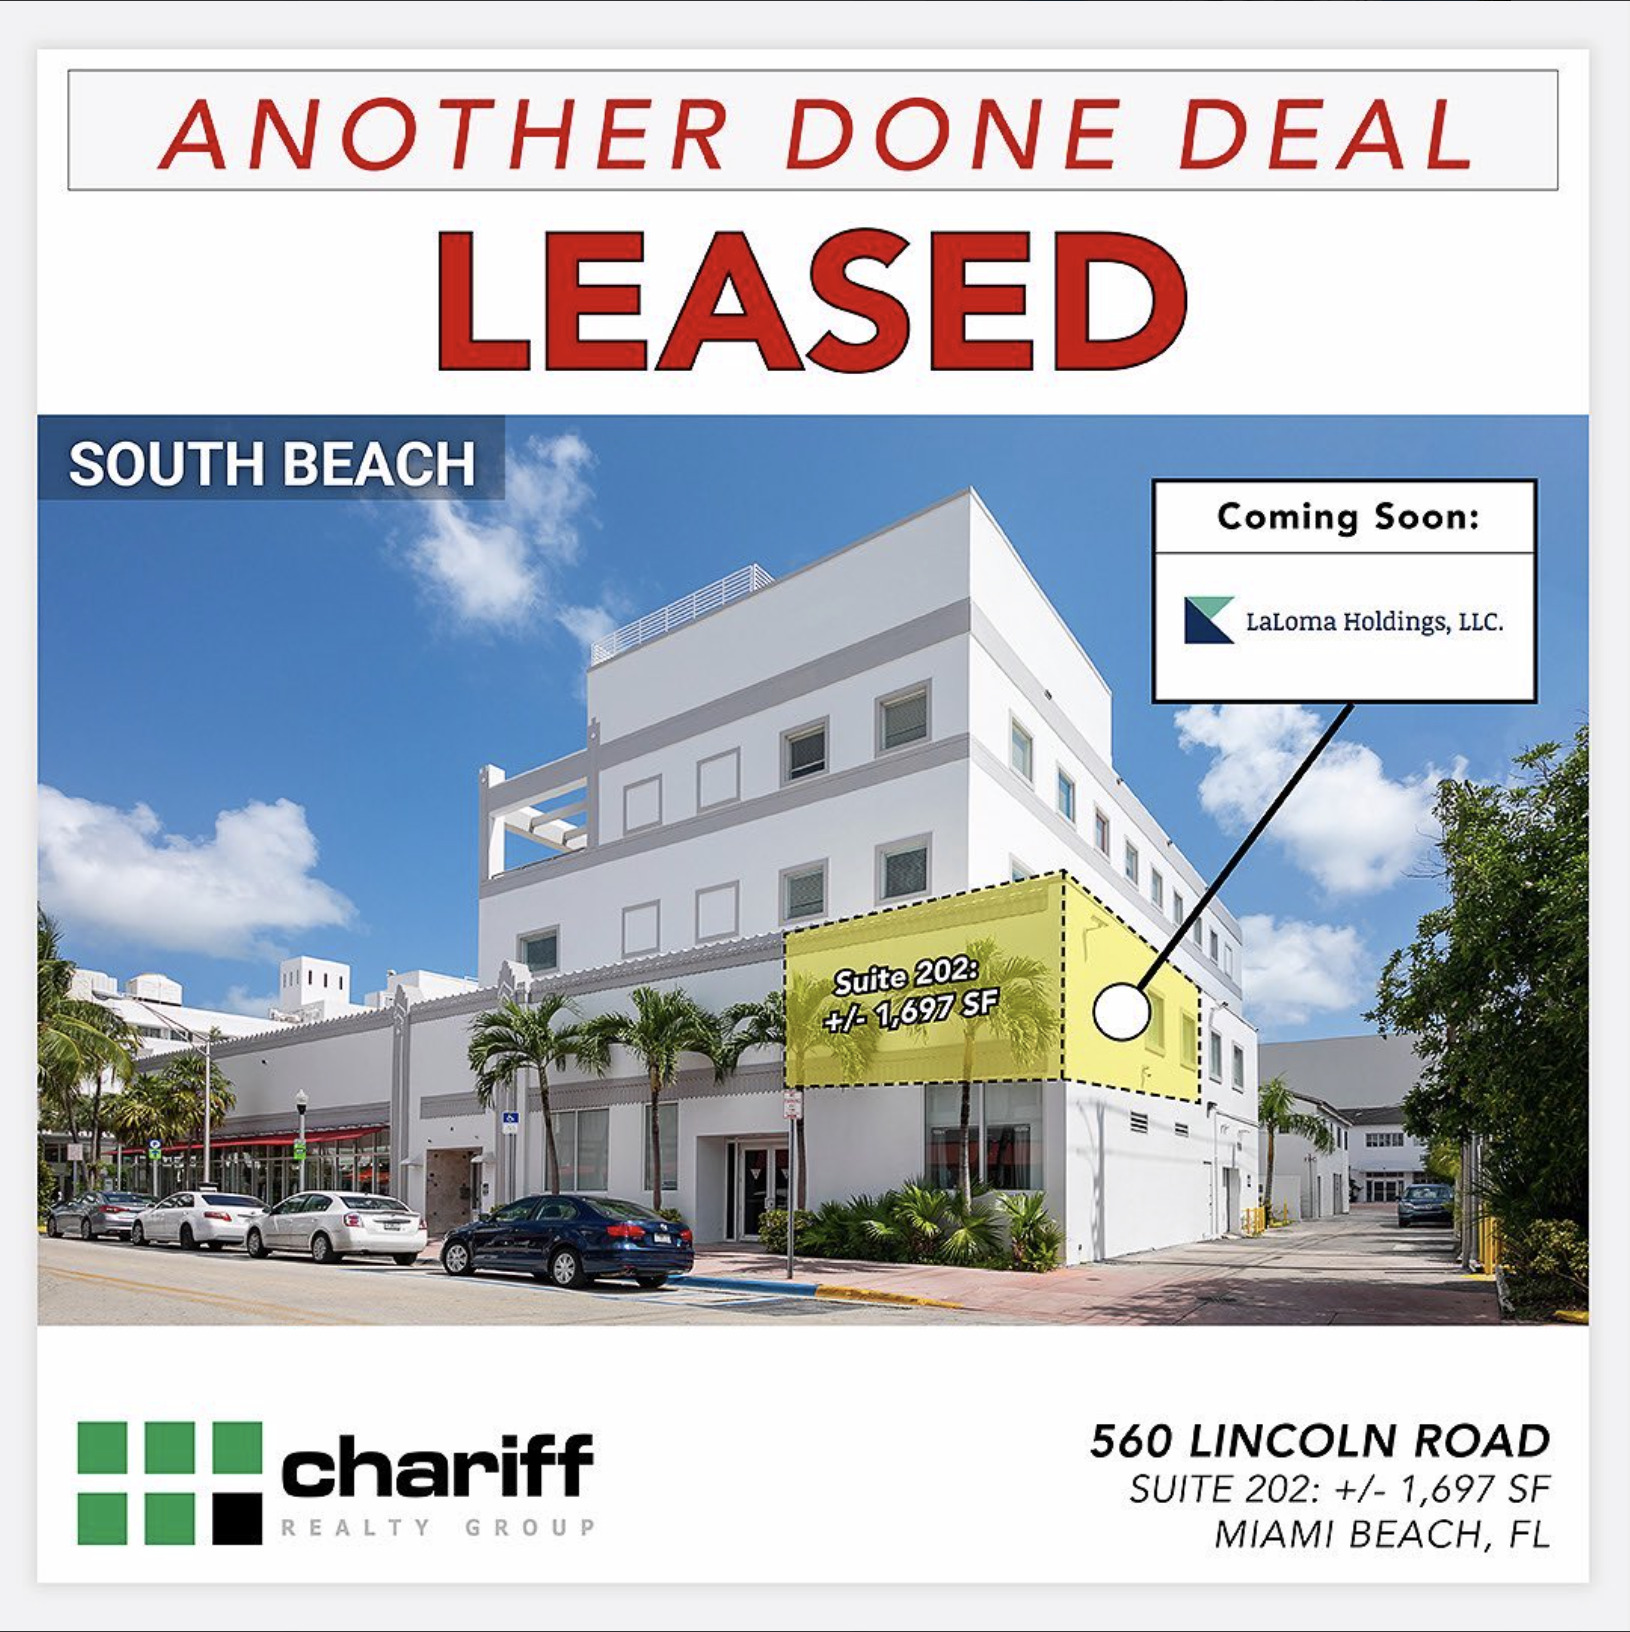 560 Lincoln Road - Another Done Deal - LEASED - Miami Beach - Florida 33139 - Chariff Realty Group